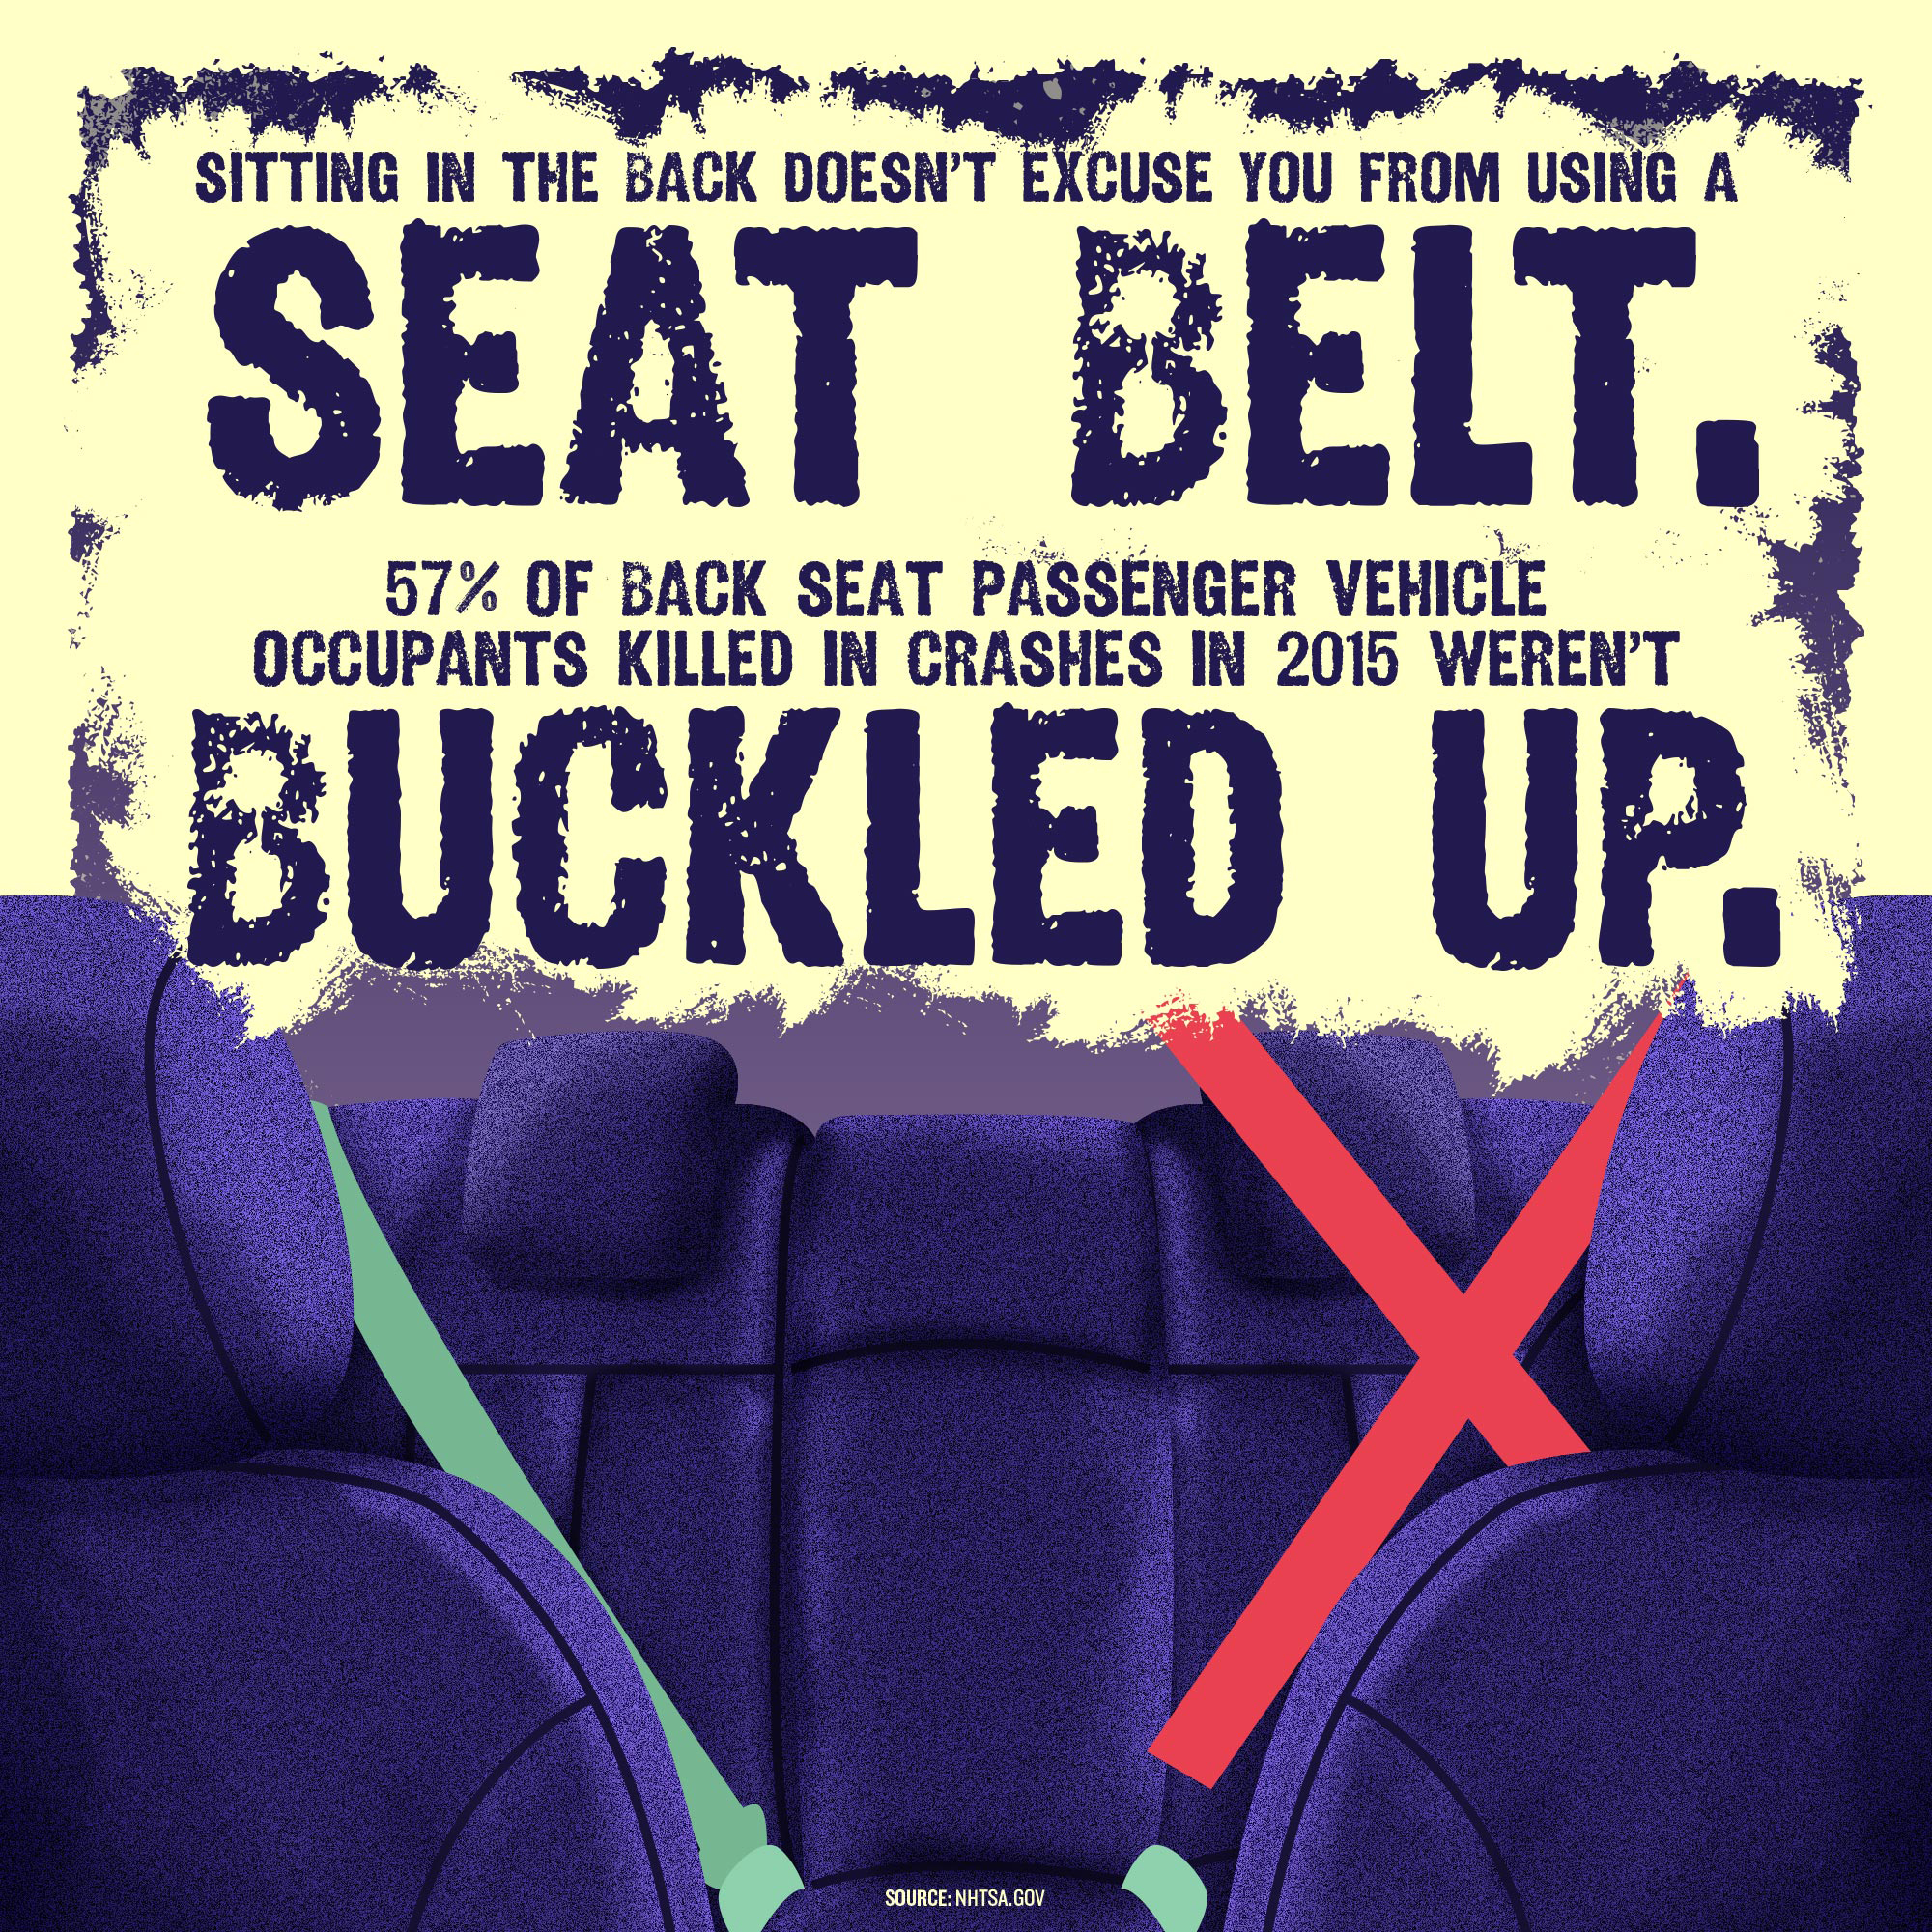 Sitting in the back doesn't excuse you from using a seat belt. 57% of back seat passenger vehicle occupants killed in crashes in 2015 weren't buckled up.